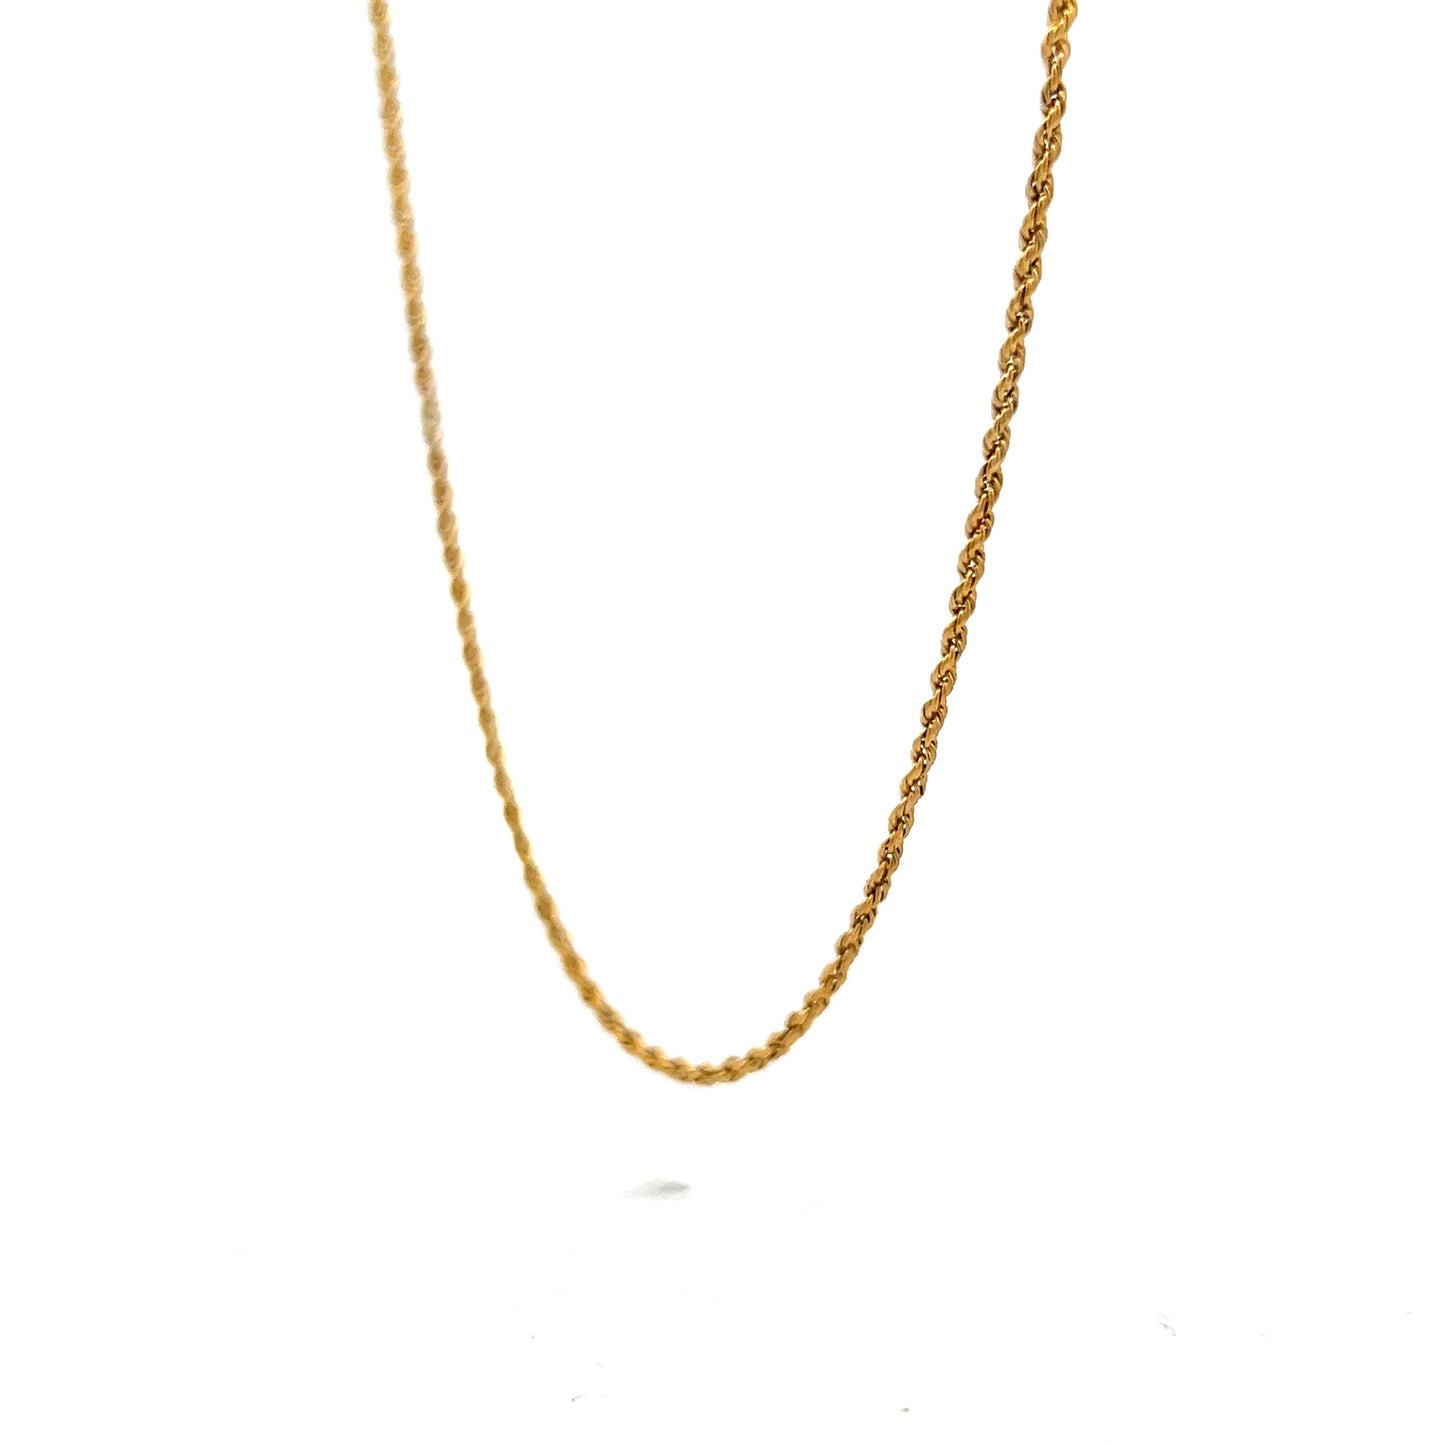 26" Rope Chain Necklace in 14k Yellow Gold